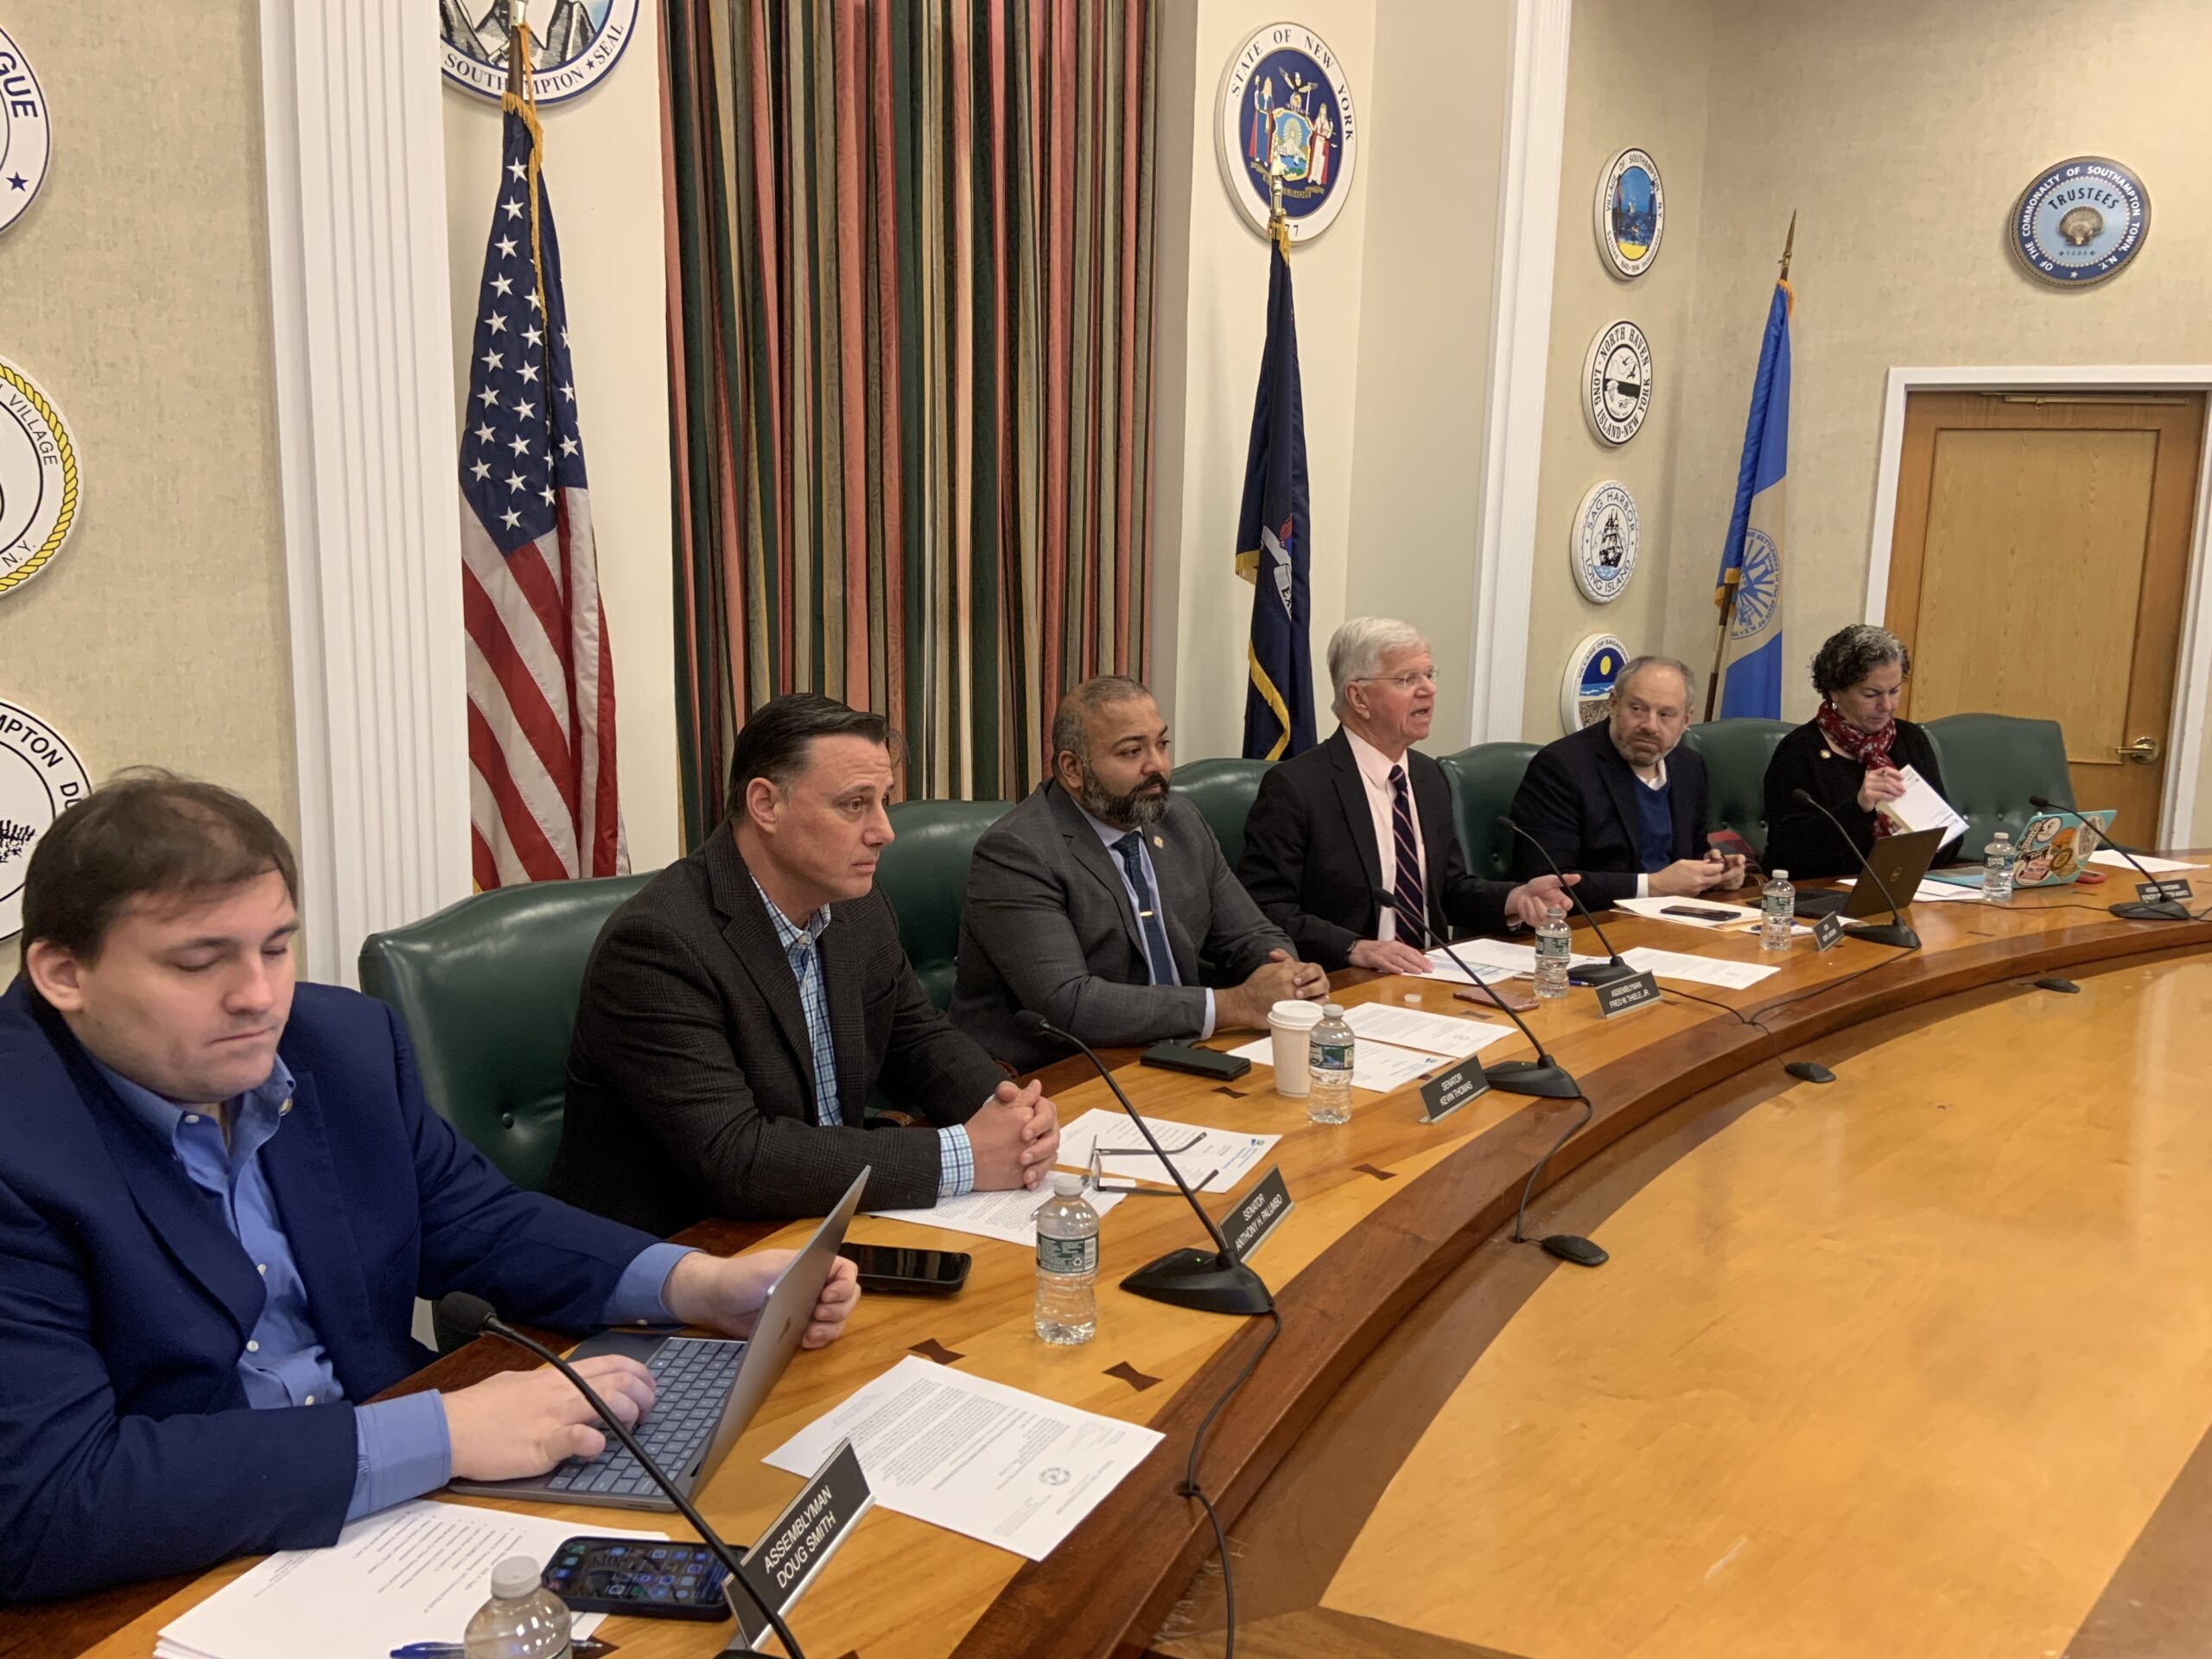 Members of the State Legislature's LIPA Commission conducted a hearing on the future of the authority at Southampton Town Hall on Friday, January 20. STEPHEN J.KOTZ